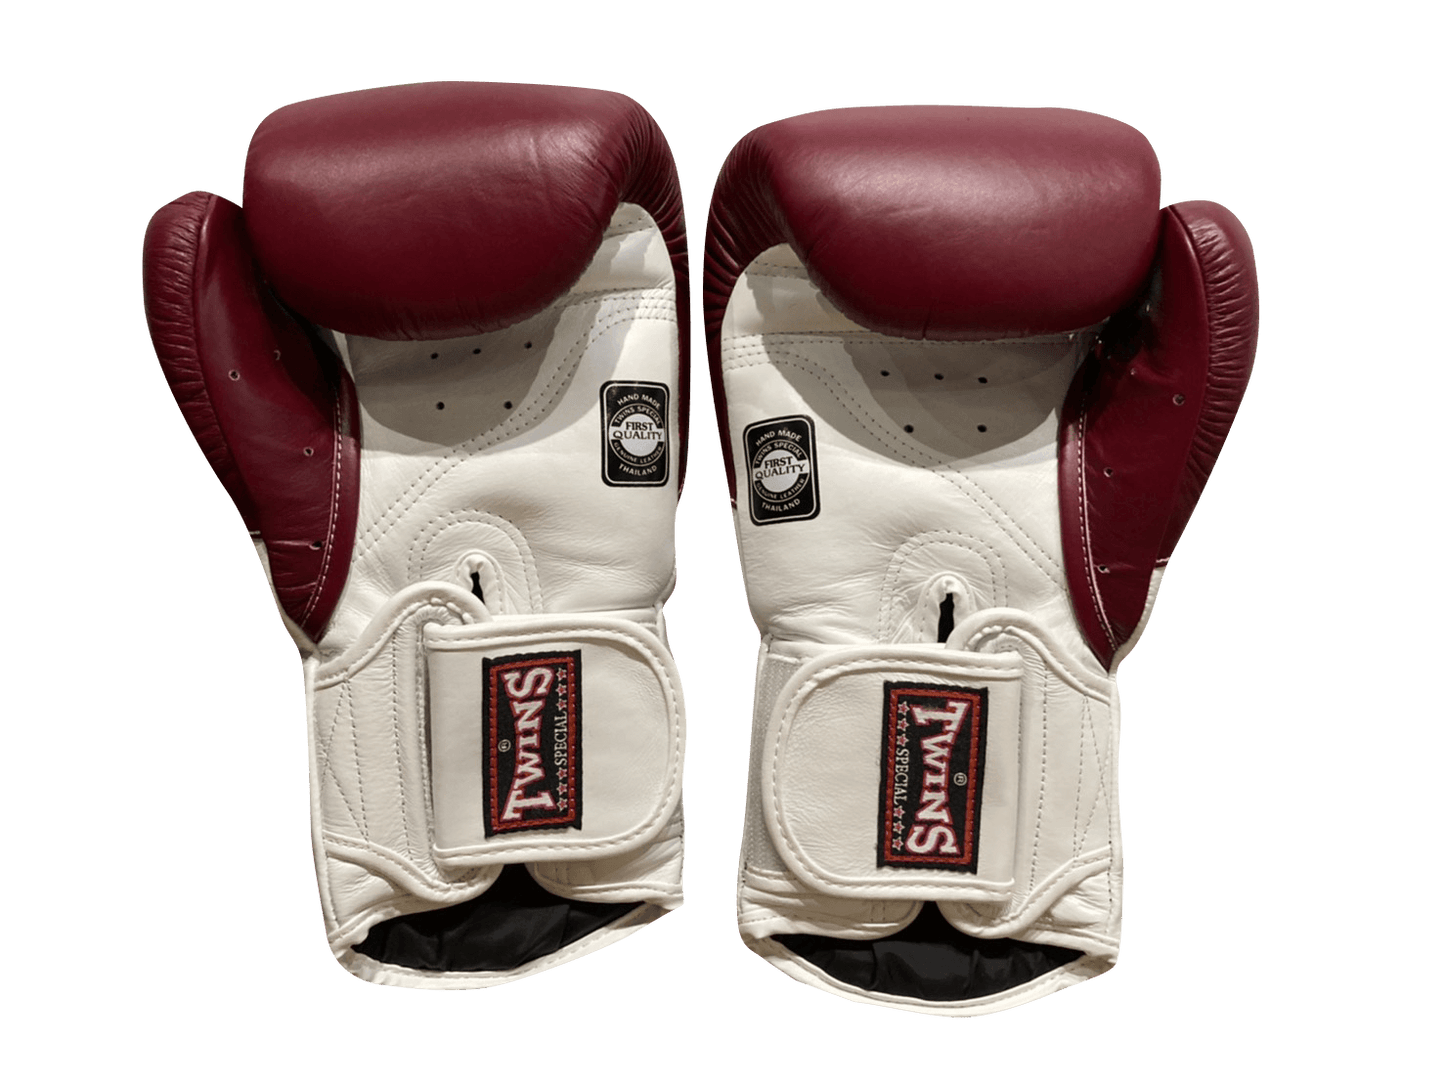 Twins Special BOXING GLOVES BGVL6 White Maroon - SUPER EXPORT SHOP